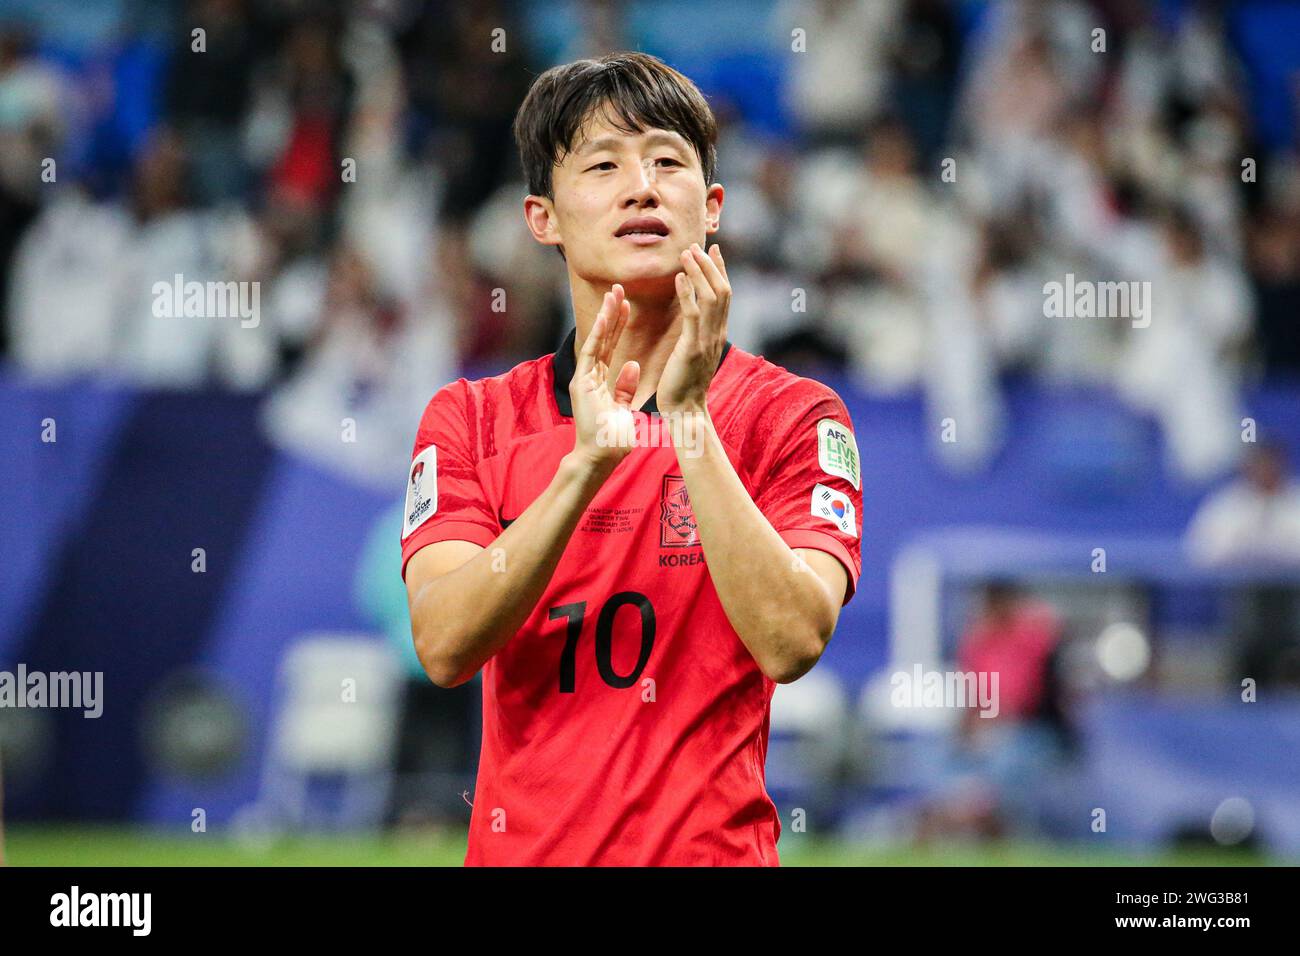 Doha, Qatar, 2 Feb 2024, AFC Asian Cup Qatar 2023 Quater Final: Australia 1-2 South Korea, Son Heung-min, Hwang Hee-chan save the day to carry Korea into semifinals. Image: Lee Jae-sung thanks the fans. Stock Photo